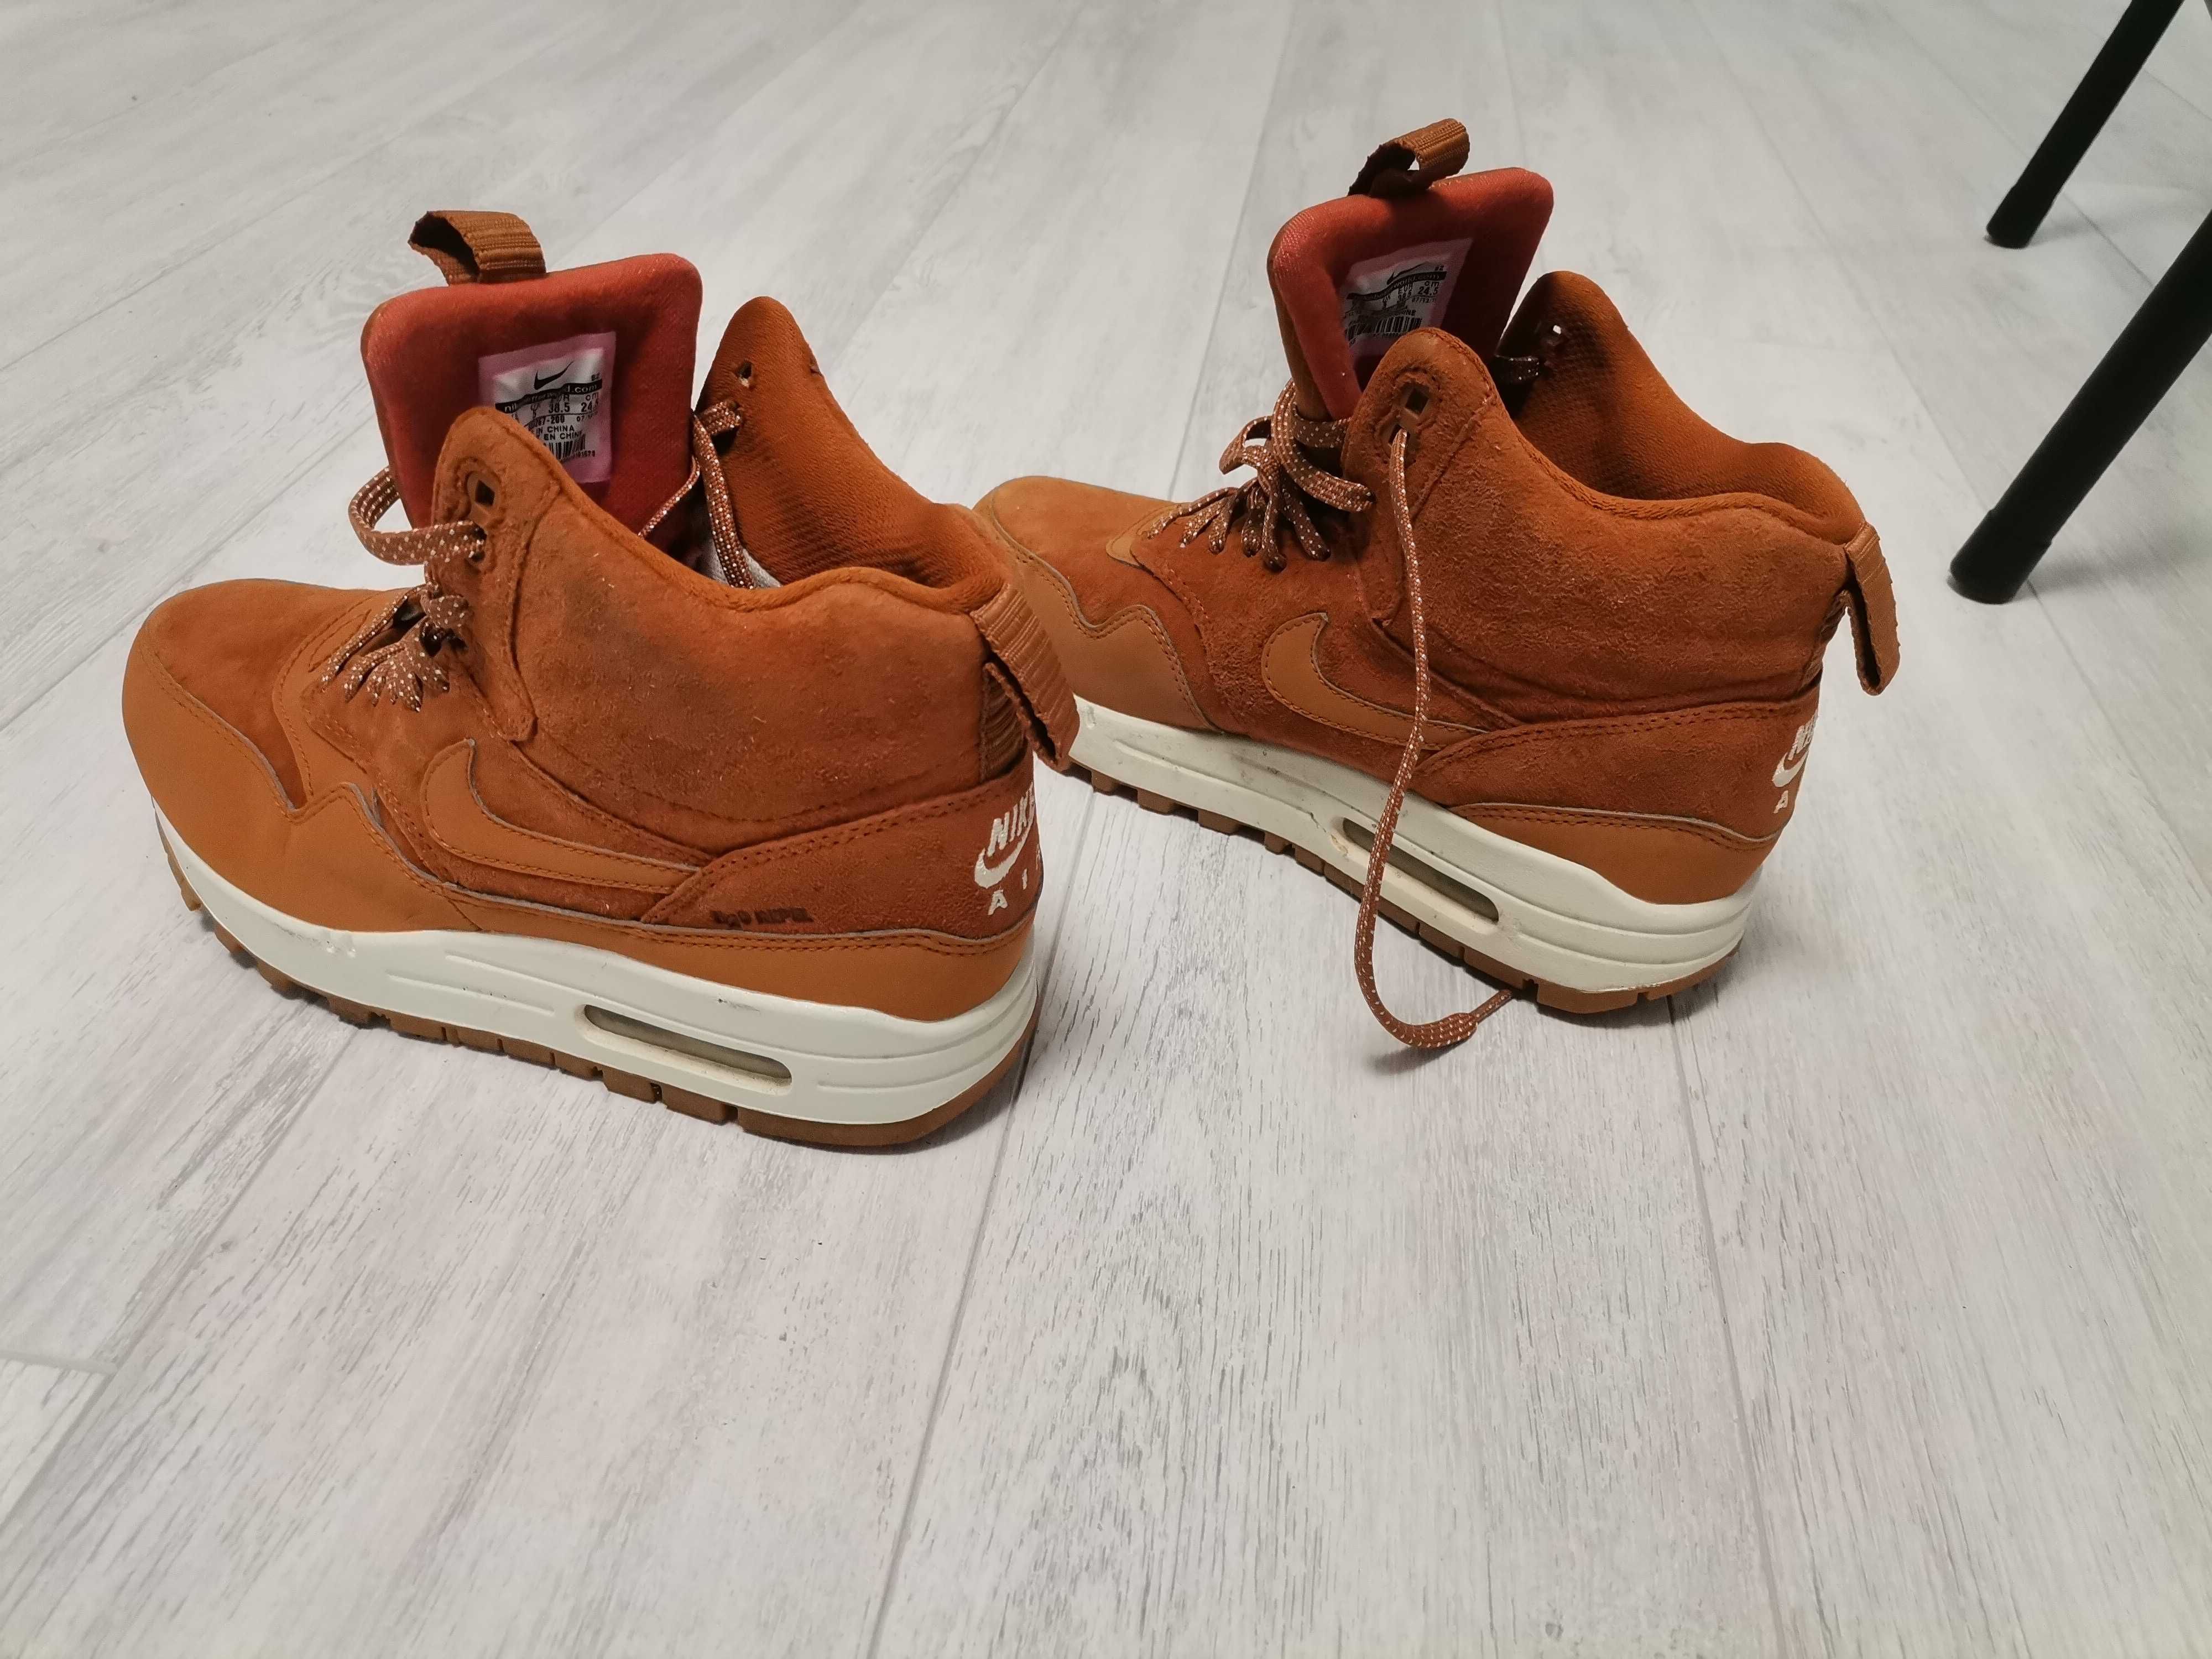 Nike WMNS AIR max 1 MID sneakrboot